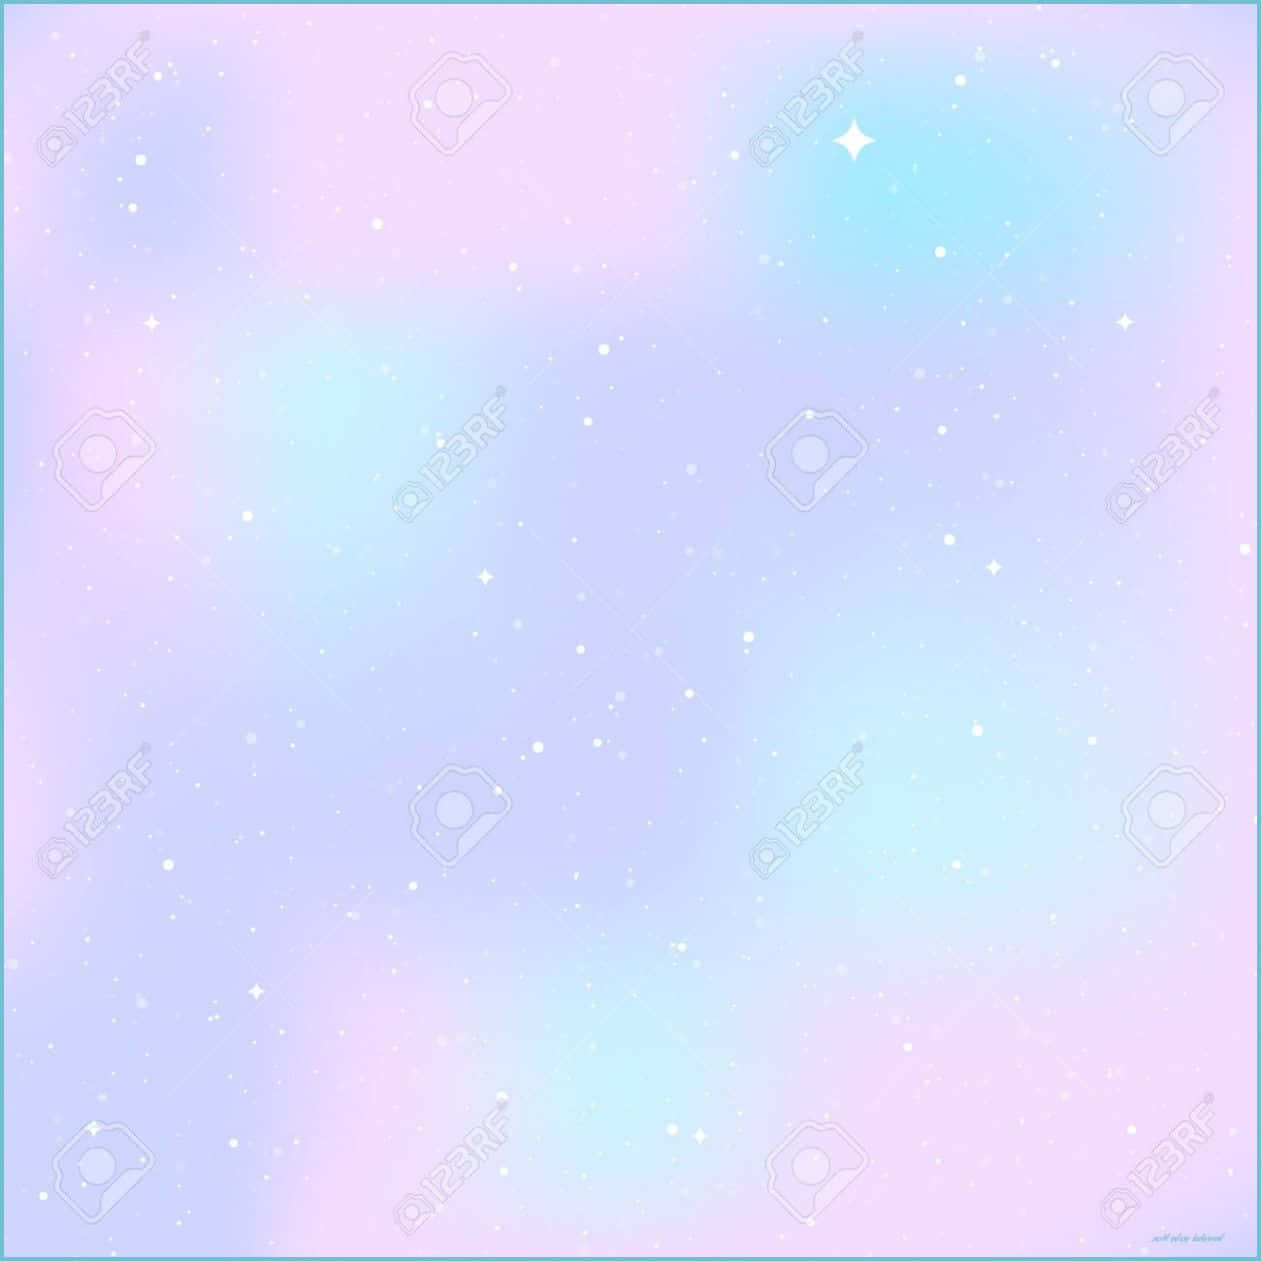 "Experience the beauty of the cosmos with this stunning Cute Pastel Galaxy wallpaper" Wallpaper